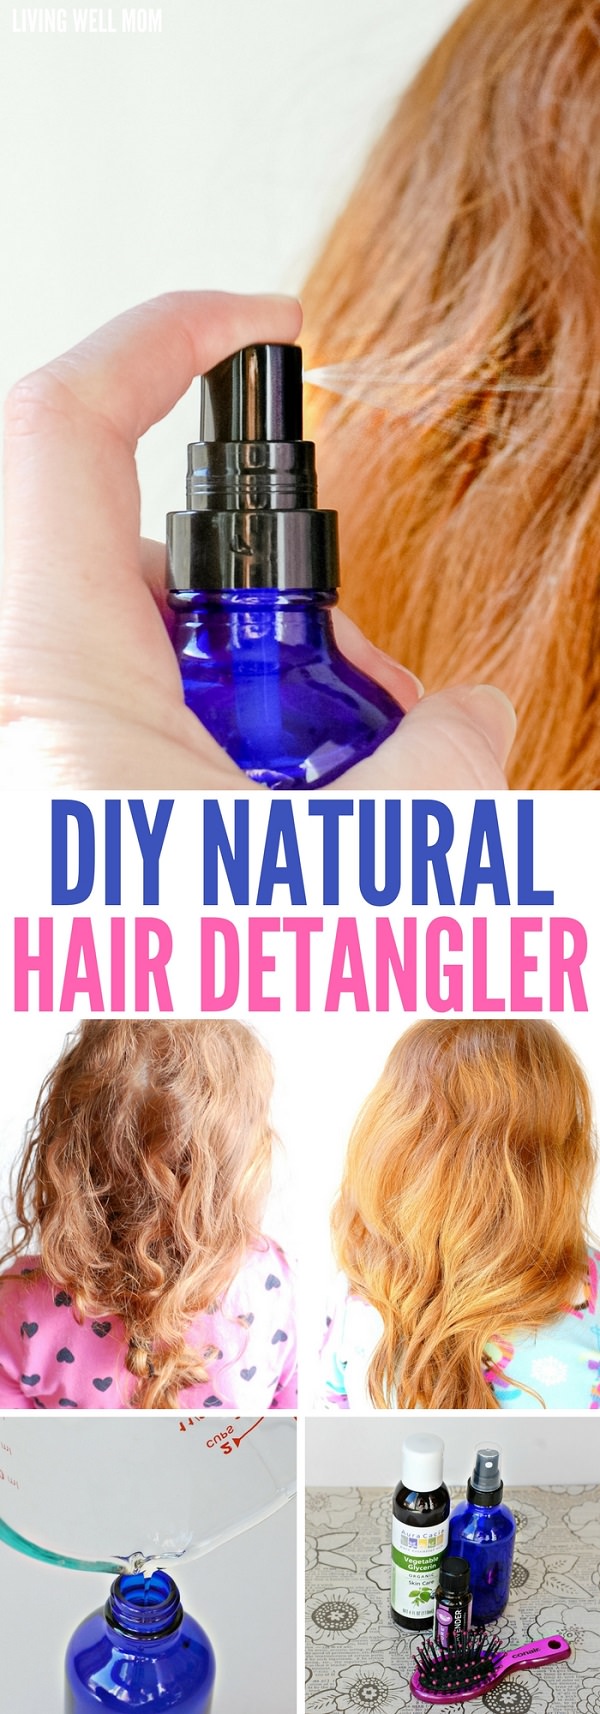 With just 3 ingredients, including essential oils, this DIY Hair Detangler will save you from hair nightmare naturally!